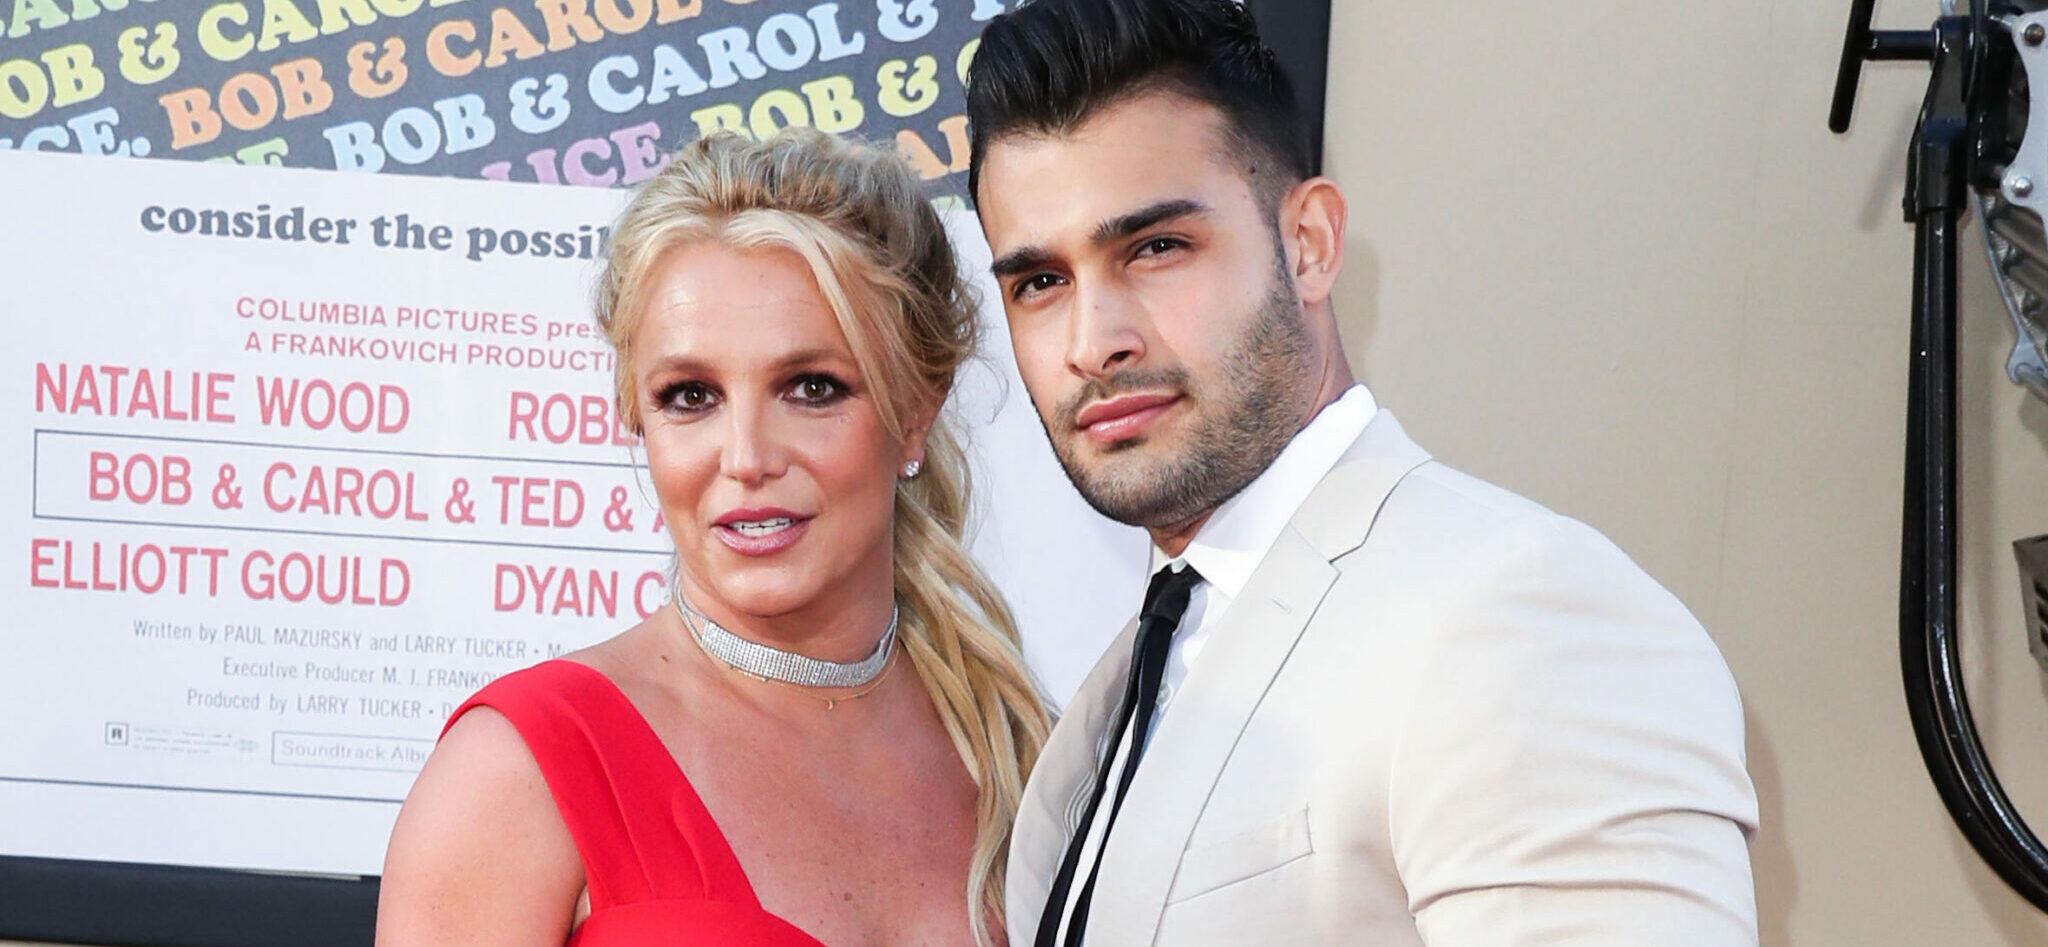 Britney Spears Shares New Look At Swollen Foot While Sam Asghari ‘Feels Terrible’